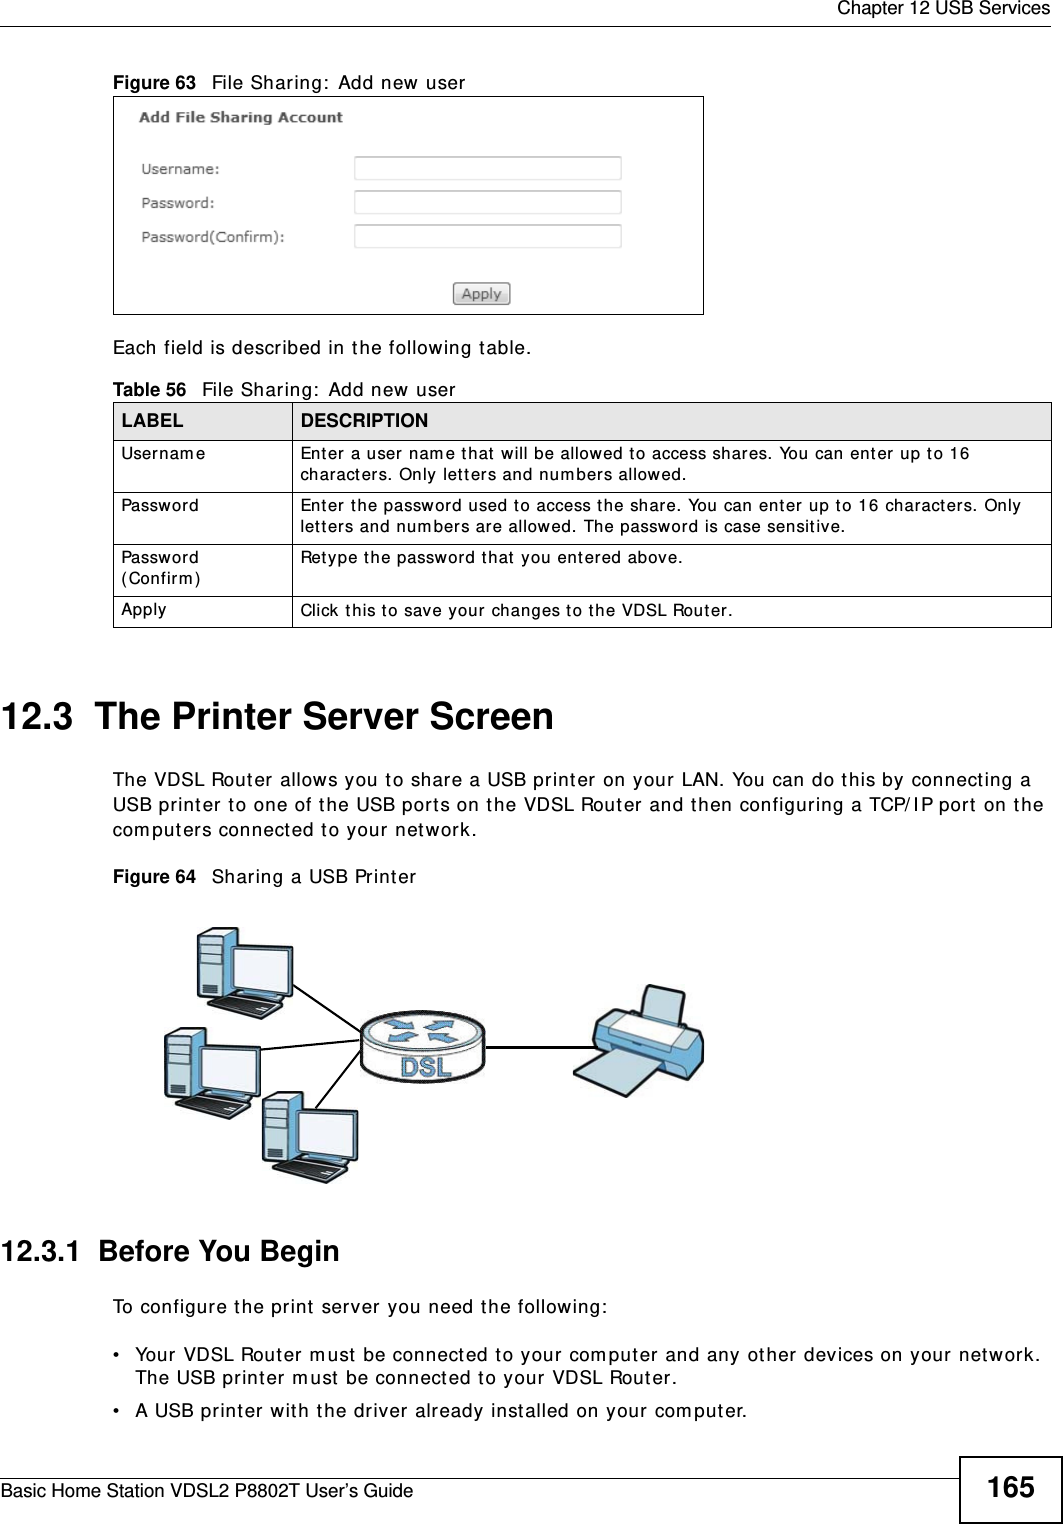  Chapter 12 USB ServicesBasic Home Station VDSL2 P8802T User’s Guide 165Figure 63   File Sharing:  Add new  user Each field is described in the following table.12.3  The Printer Server ScreenThe VDSL Router allows you t o share a USB print er on your LAN. You can do t his by connect ing a USB printer to one of the USB ports on t he VDSL Router  and then configuring a TCP/ I P port on t he com puters connect ed t o your net work. Figure 64   Sharing a USB Printer12.3.1  Before You BeginTo configure the print  server you need the follow ing:• Your VDSL Router m ust  be connect ed to your com put er and any ot her devices on your net work. The USB print er m ust  be connect ed t o your VDSL Router.• A USB print er with t he driver already inst alled on your com put er.Table 56   File Sharing:  Add new user LABEL DESCRIPTIONUsernam e Enter  a user nam e that  will be allowed to access shares. You can enter  up t o 16 charact er s. Only let t ers and num bers allowed.Password Enter  t he password used t o access the share. You can enter up to 16 charact er s. Only lett er s and num bers are allowed. The passw ord is case sensitive.Password ( Con firm )Retype the password t hat  you ent ered above.Apply Click this to save your changes t o the VDSL Rout er.